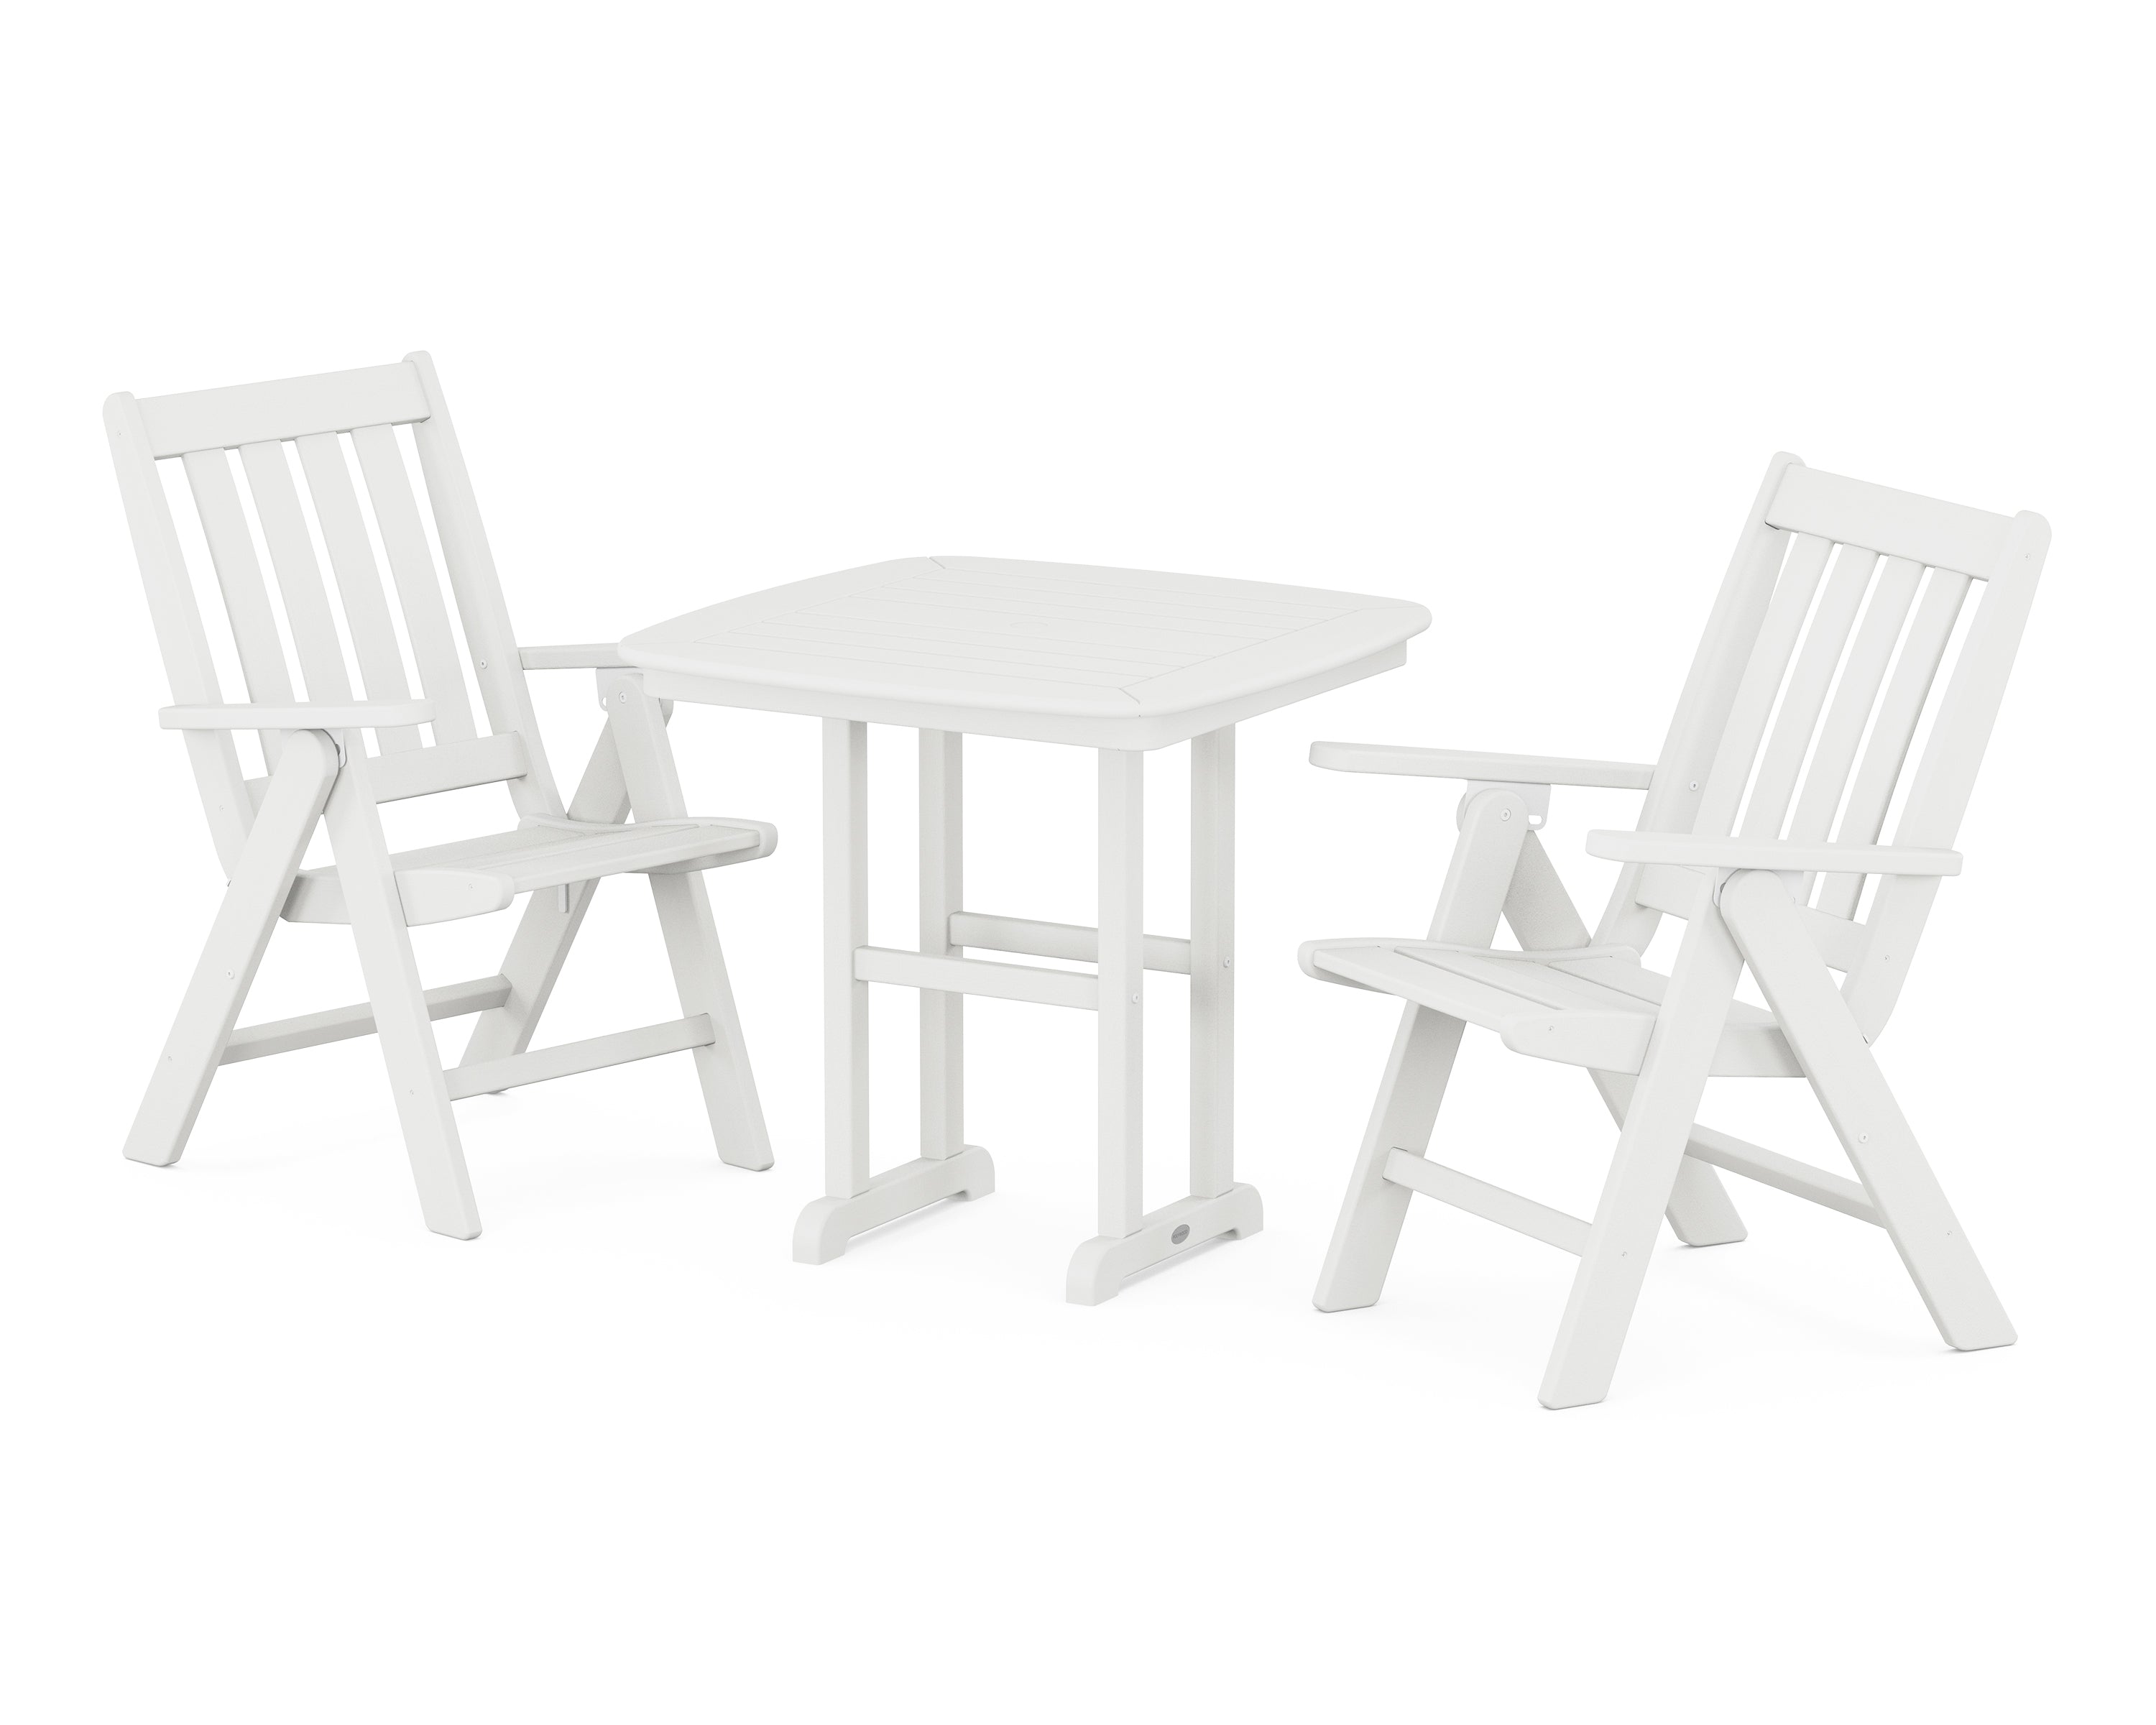 POLYWOOD® Vineyard Folding Chair 3-Piece Dining Set in Vintage White